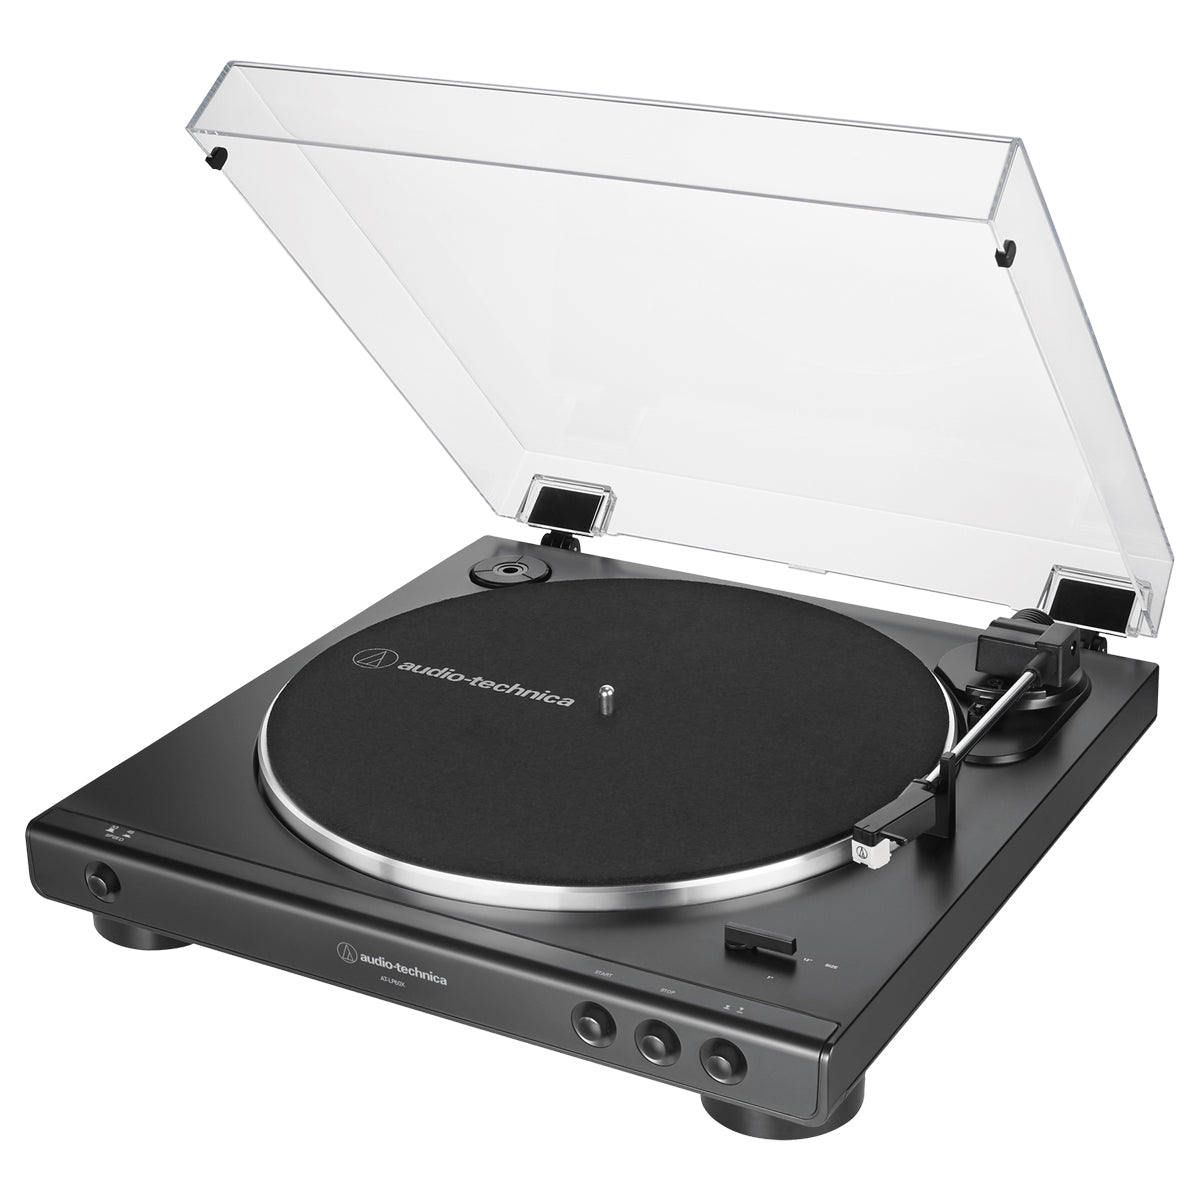 Audio Technica AT-LP60x Standard BD Turntable - Black - The Audio Experts